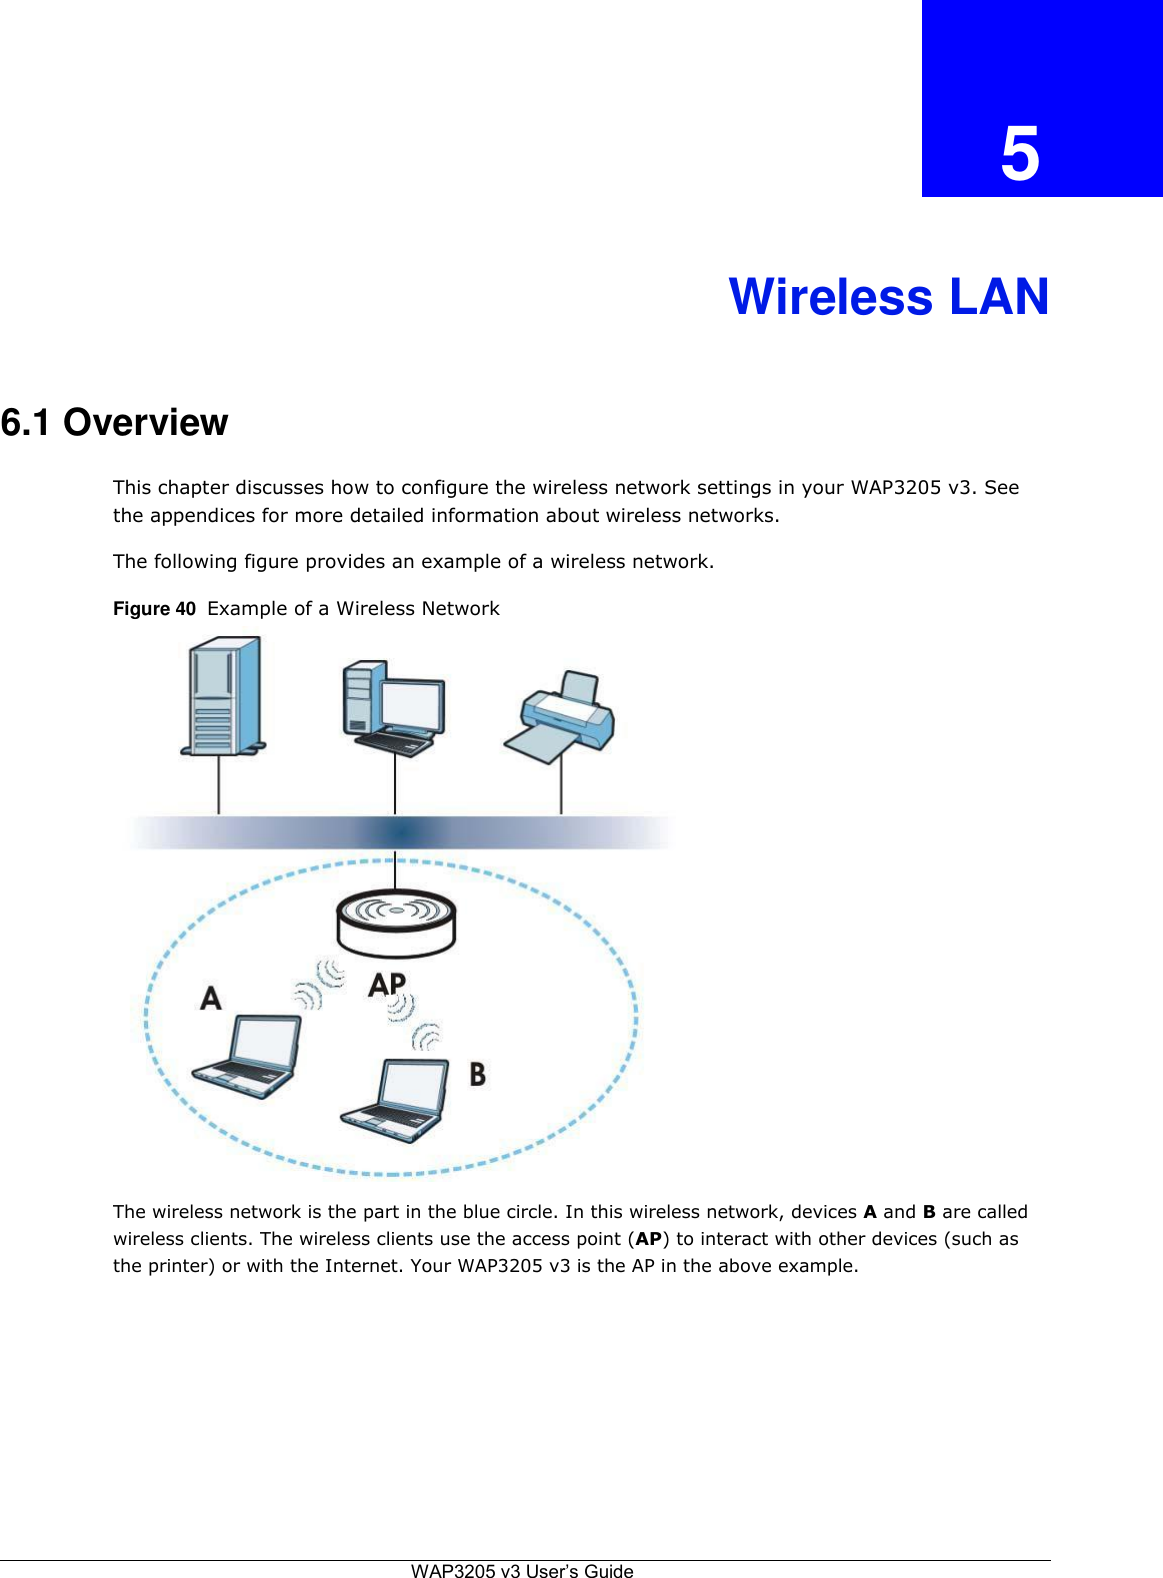   5    Wireless LAN    6.1 Overview  This chapter discusses how to configure the wireless network settings in your WAP3205 v3. See the appendices for more detailed information about wireless networks.  The following figure provides an example of a wireless network.  Figure 40  Example of a Wireless Network                            The wireless network is the part in the blue circle. In this wireless network, devices A and B are called wireless clients. The wireless clients use the access point (AP) to interact with other devices (such as the printer) or with the Internet. Your WAP3205 v3 is the AP in the above example.              WAP3205 v3 User’s Guide 